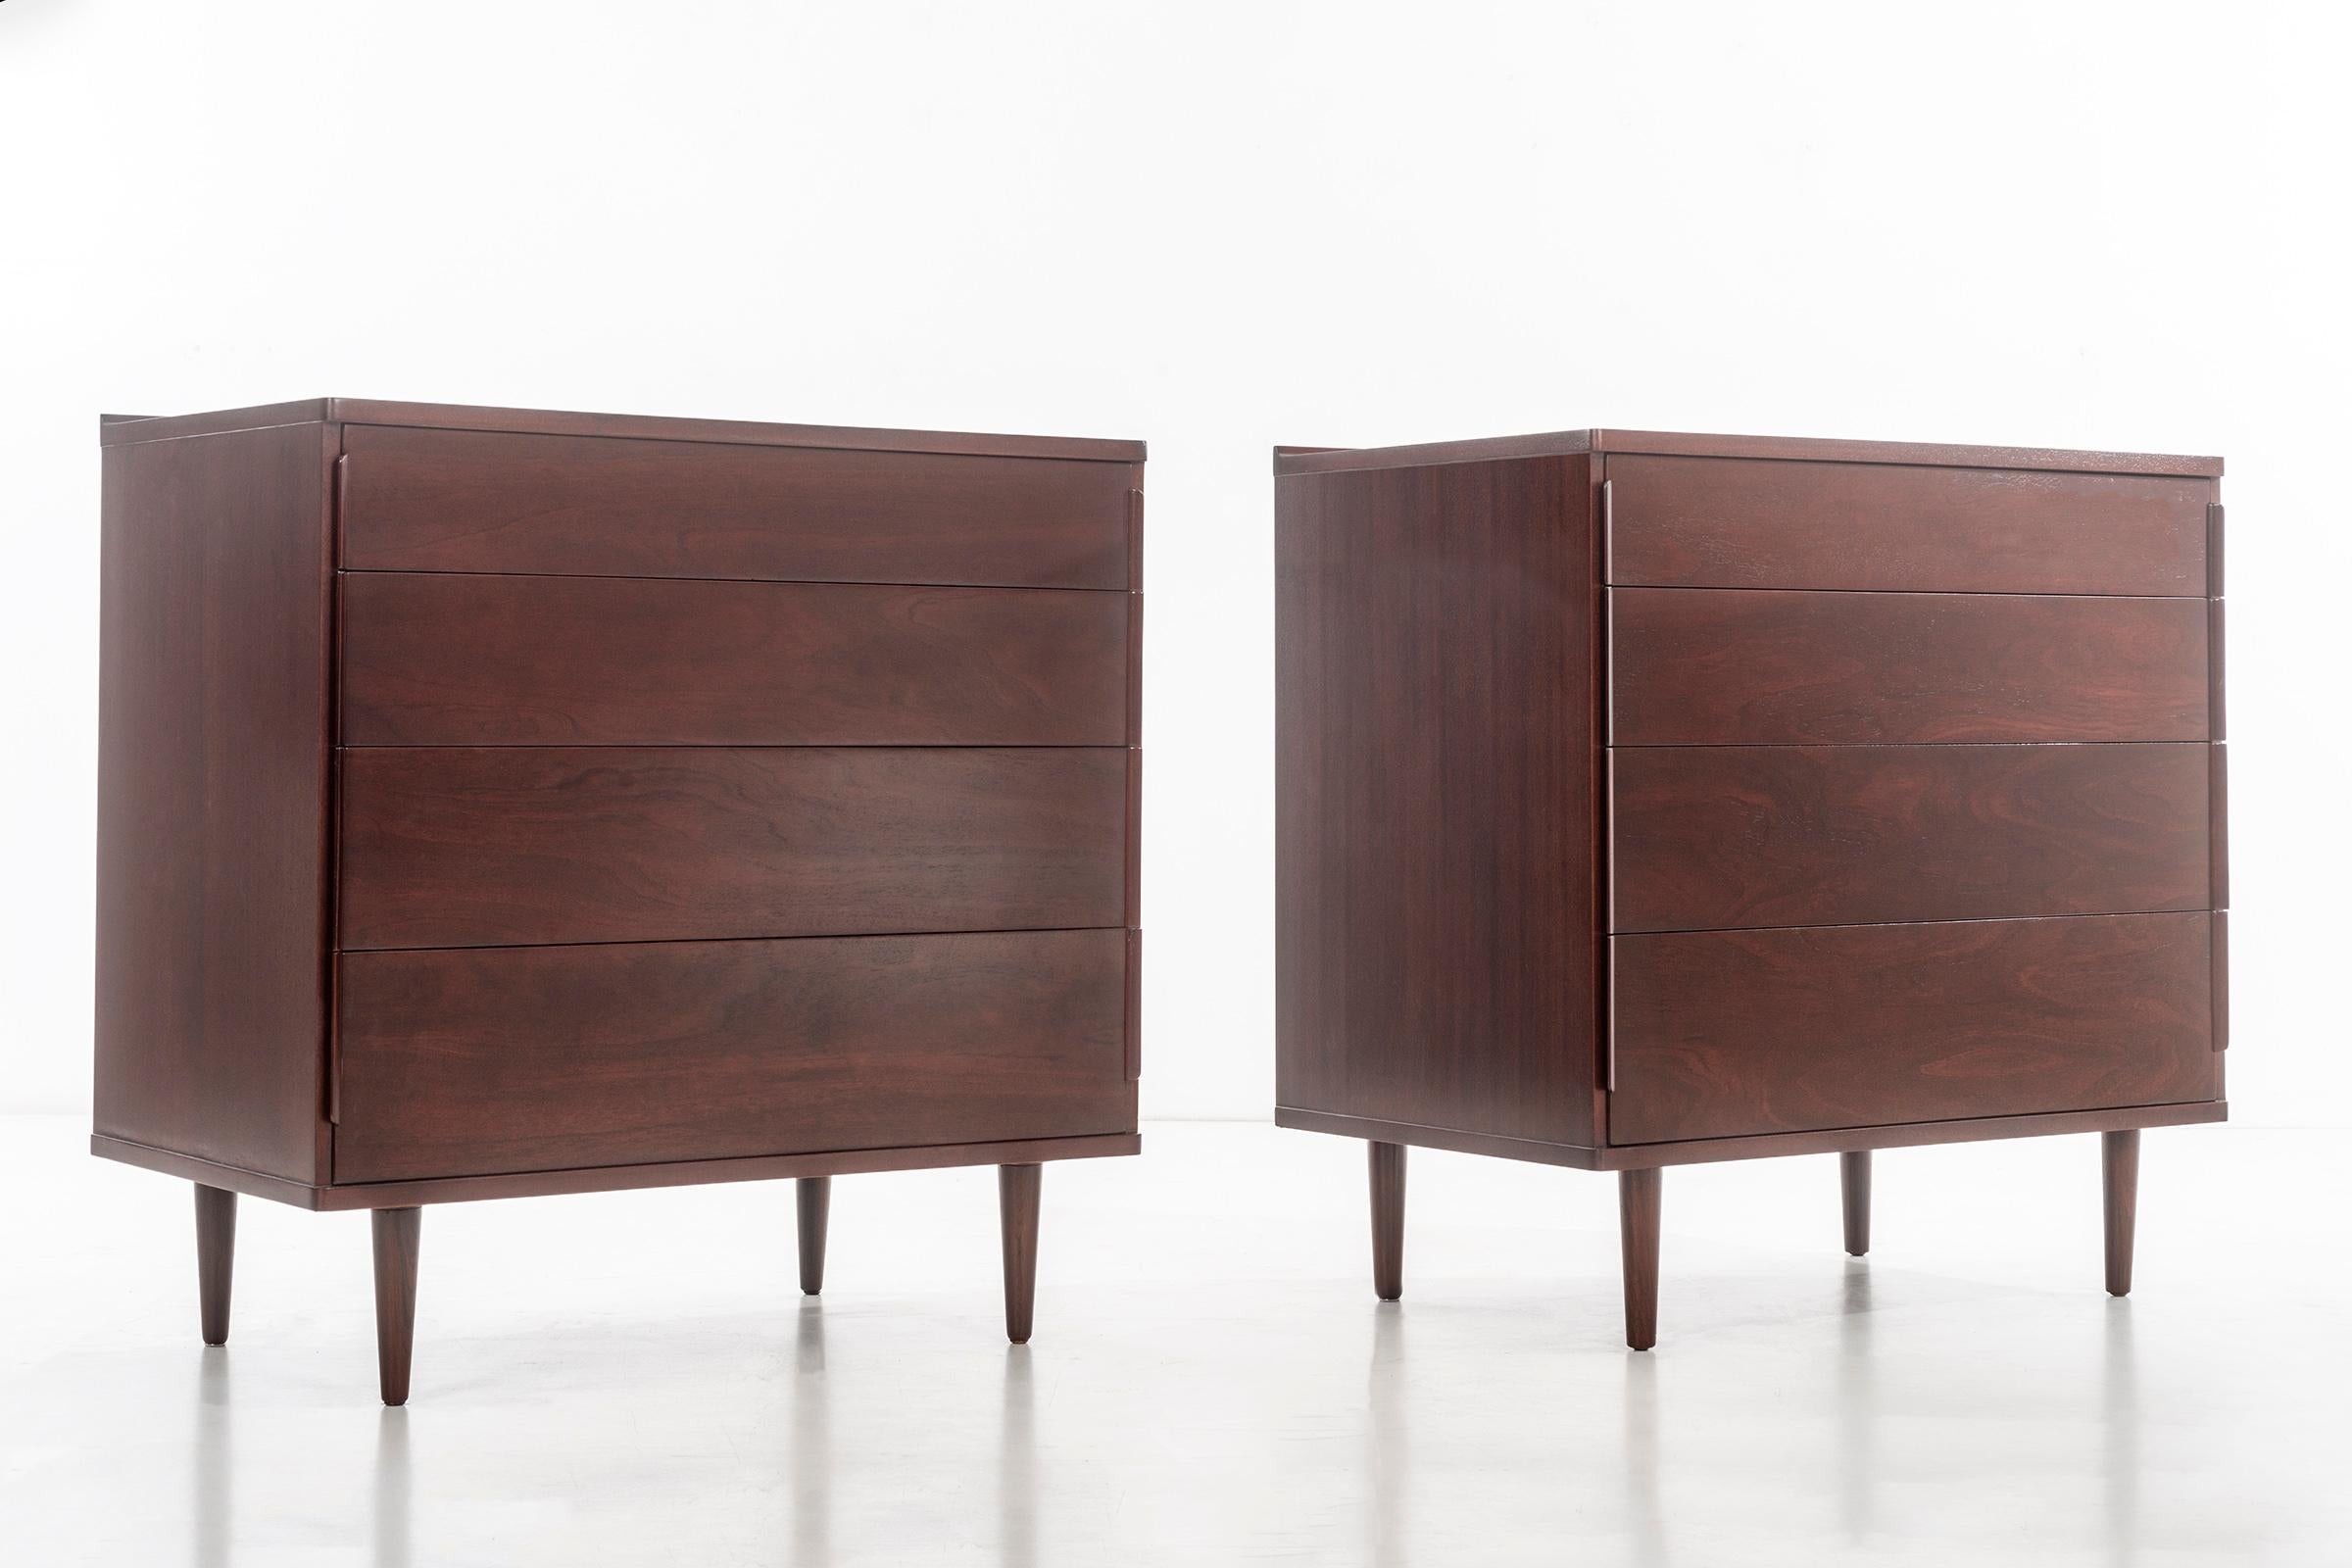 Wormley for Dunbar pair of dressers, mahogany with solid turned rosed legs.

Green metal to drawer inside 